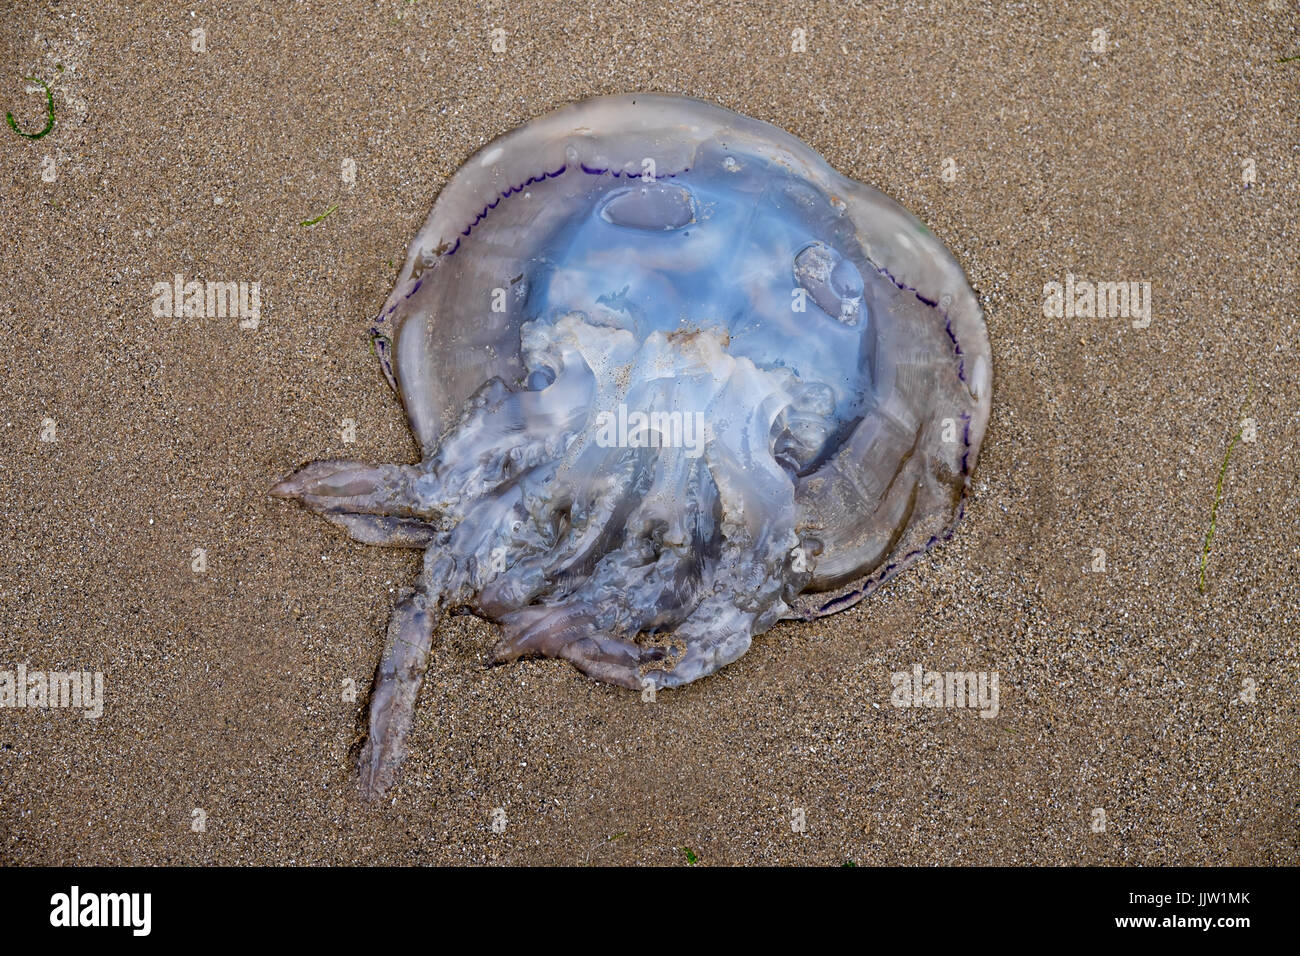 Barrel jellyfish wash up along the shore in Pembrokeshire Wales, UK 20.7.17 Stock Photo